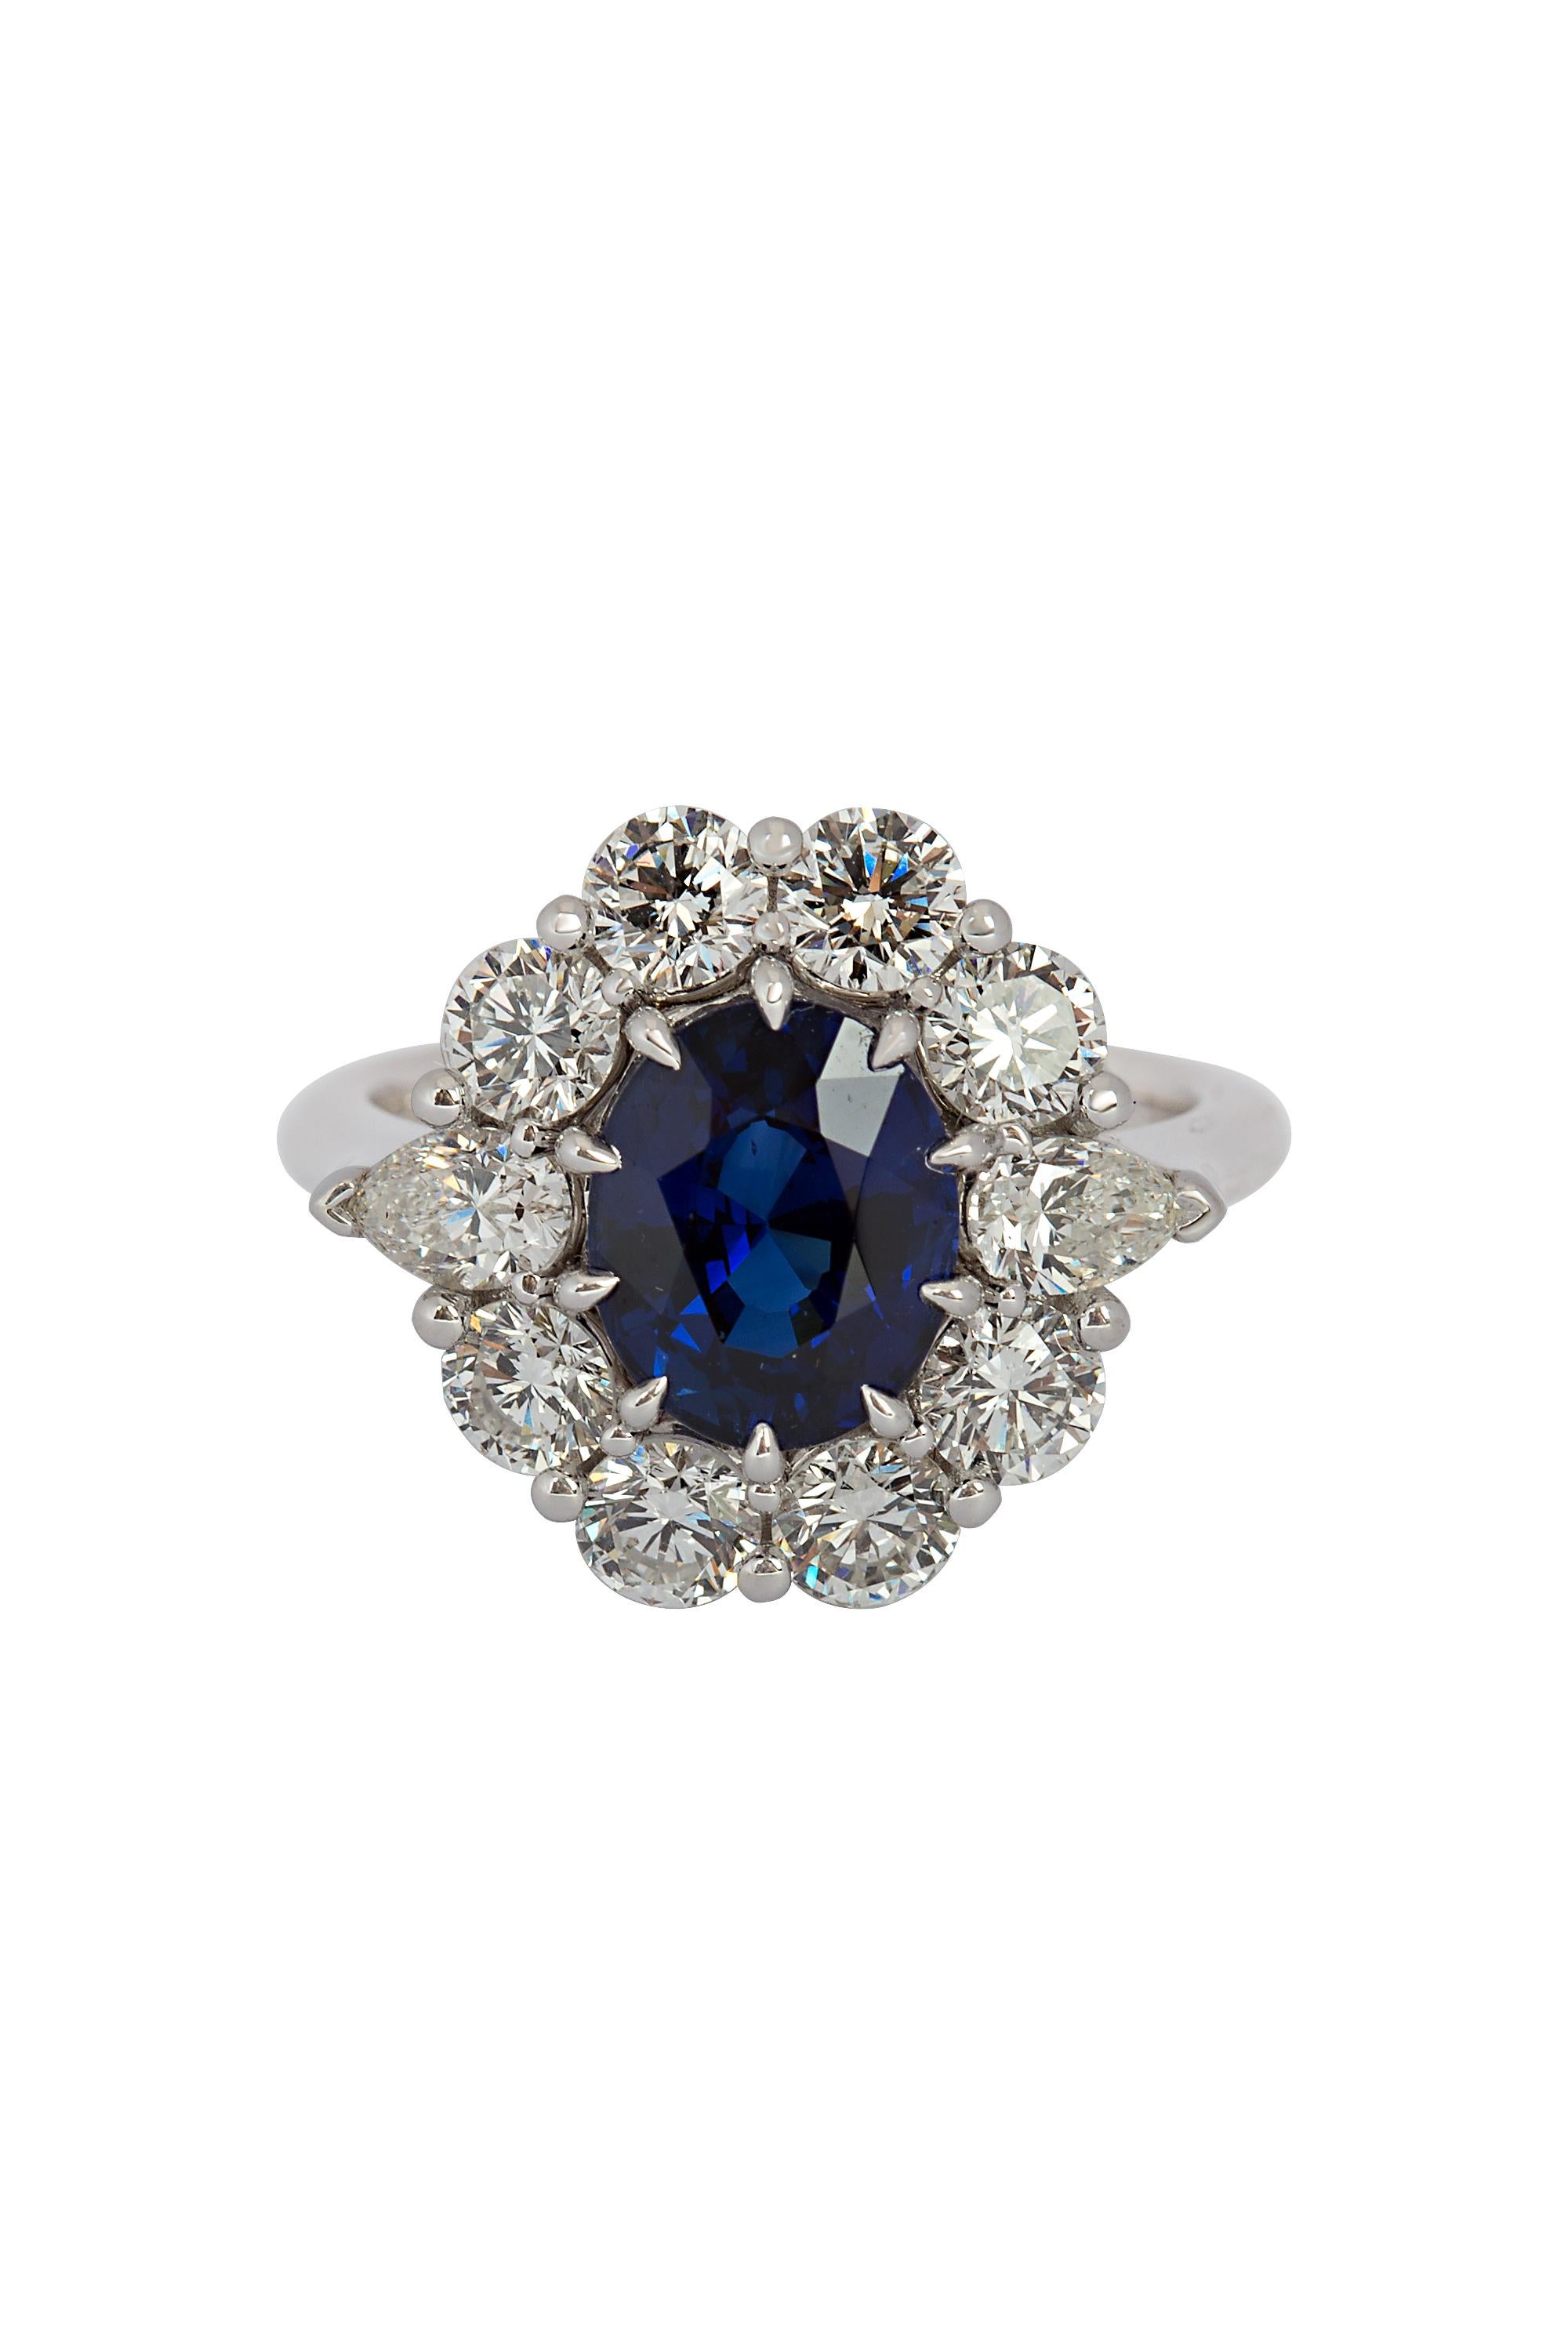 Oval Cut Gems Are Forever Oval 2.73 Carat Blue Sapphire and Diamond Ring For Sale